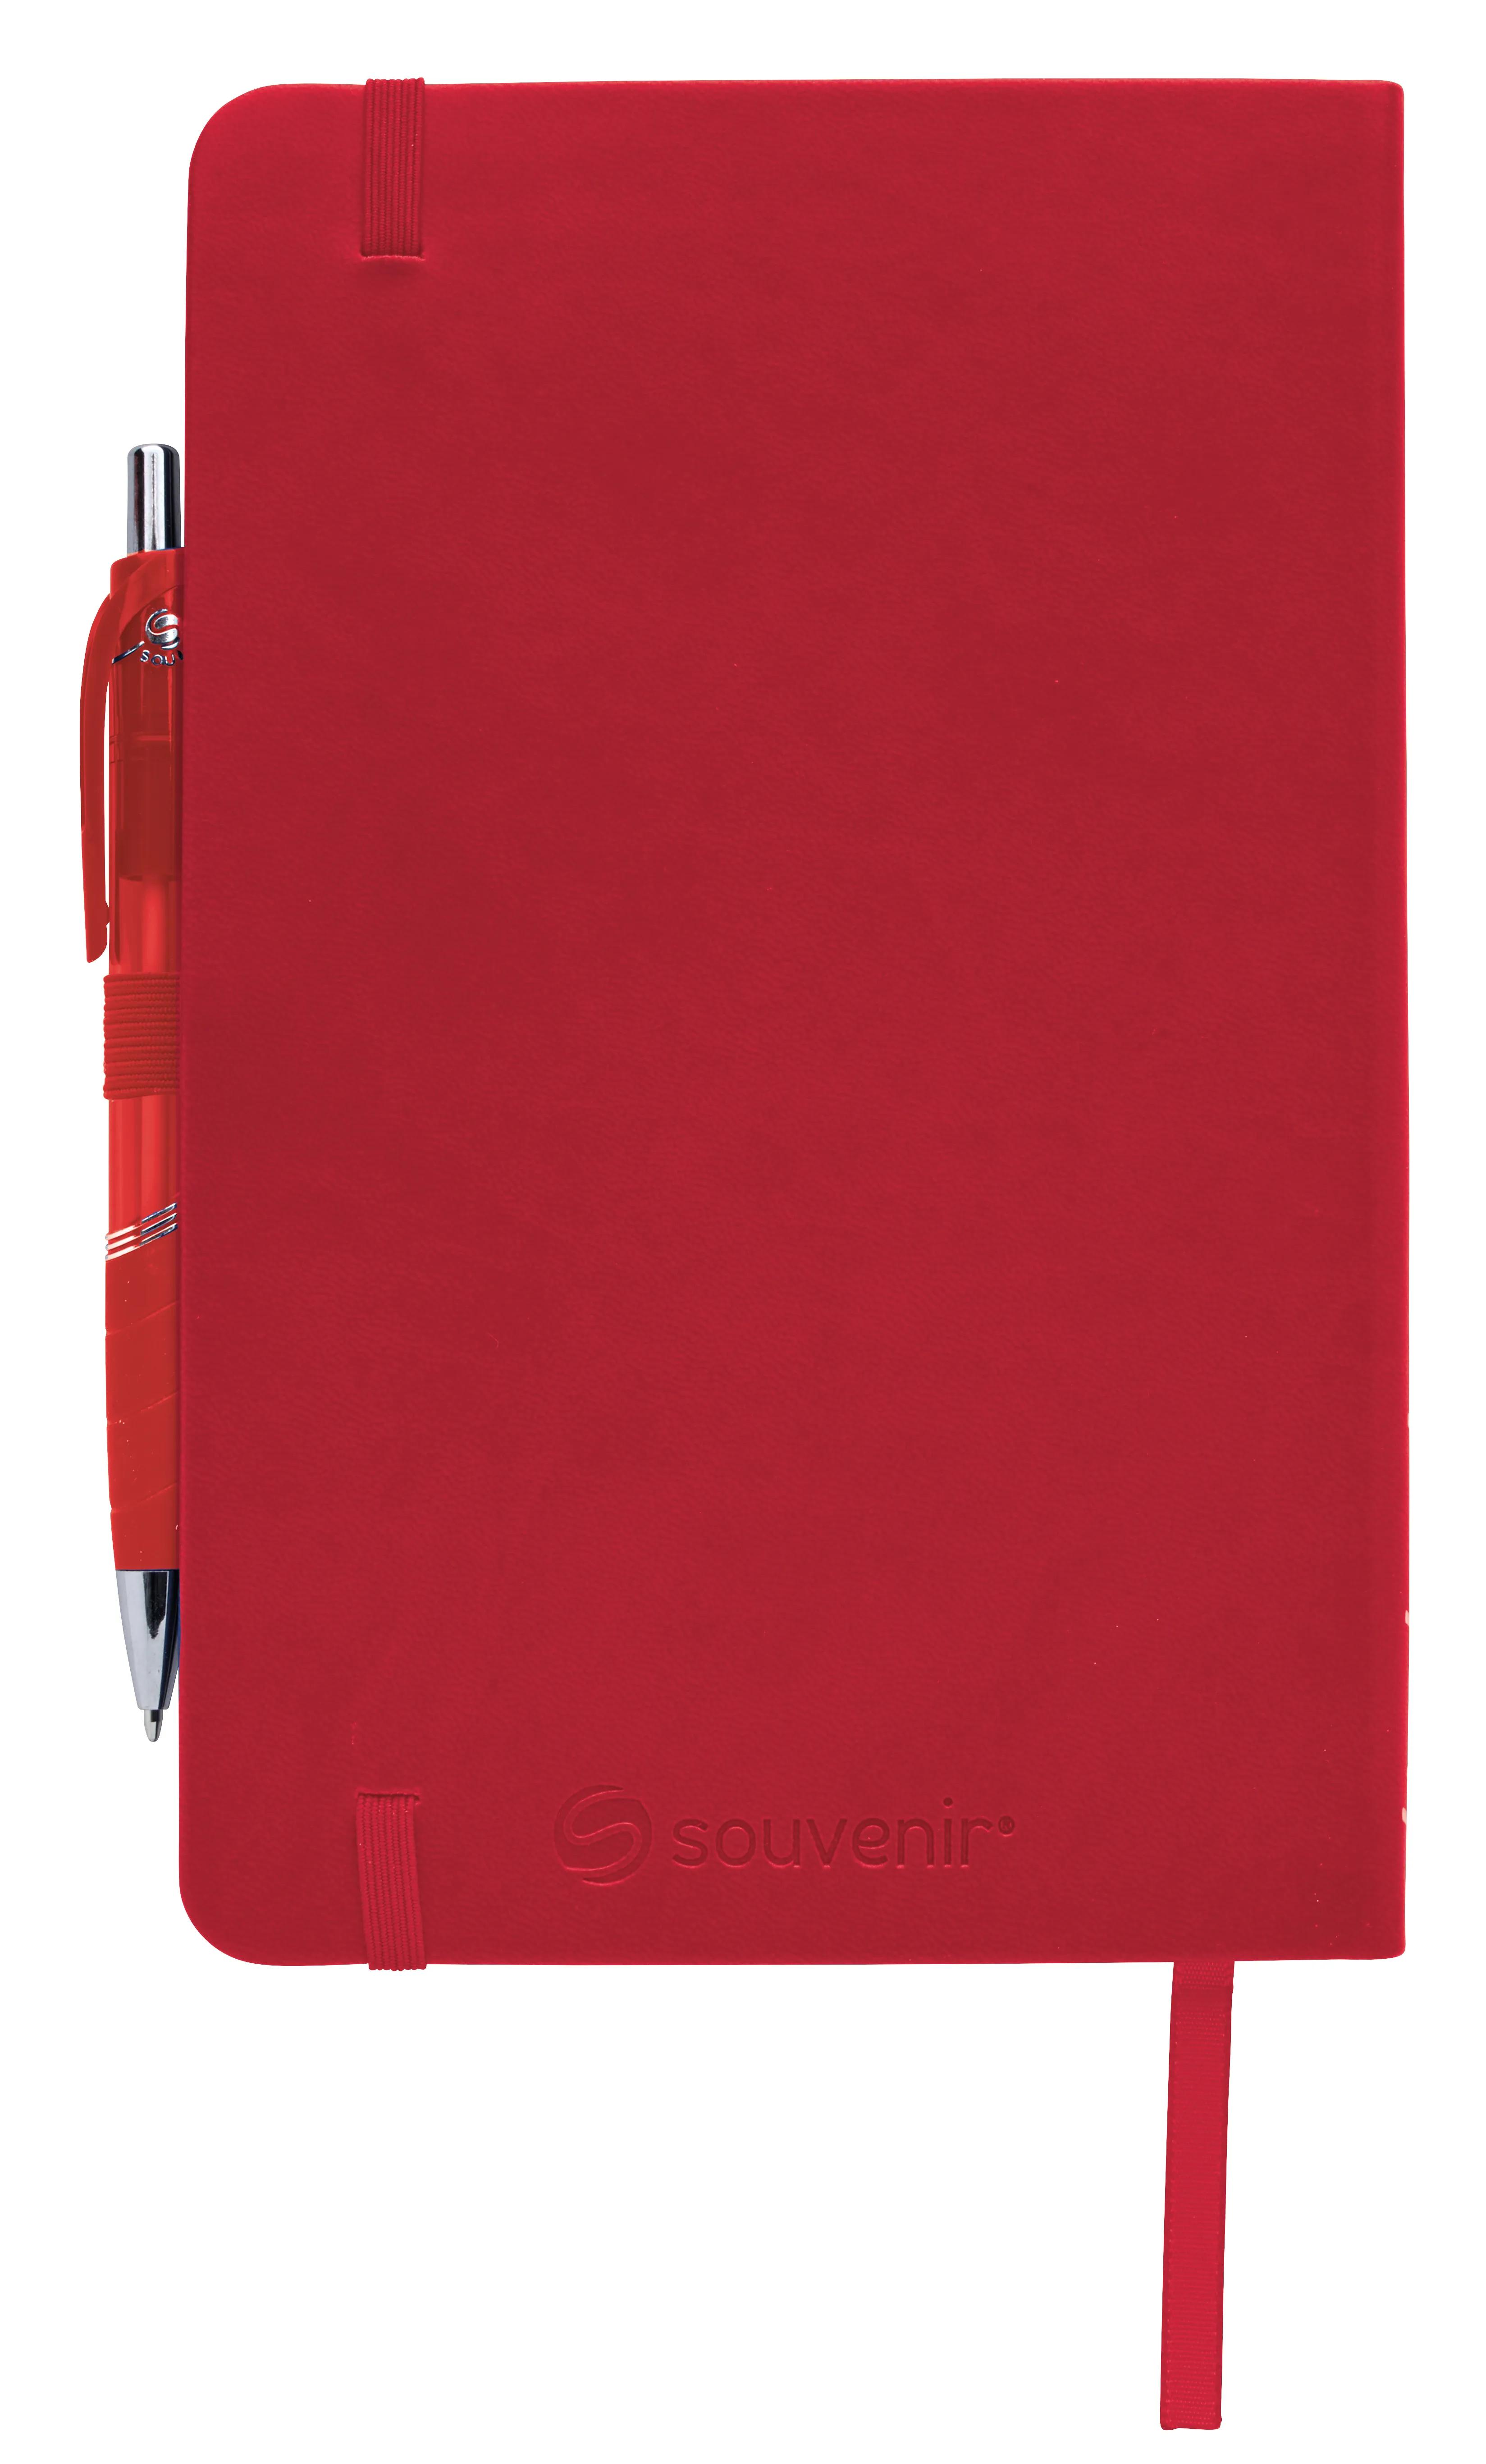 Souvenir® Journal with Rayley Pen 11 of 23